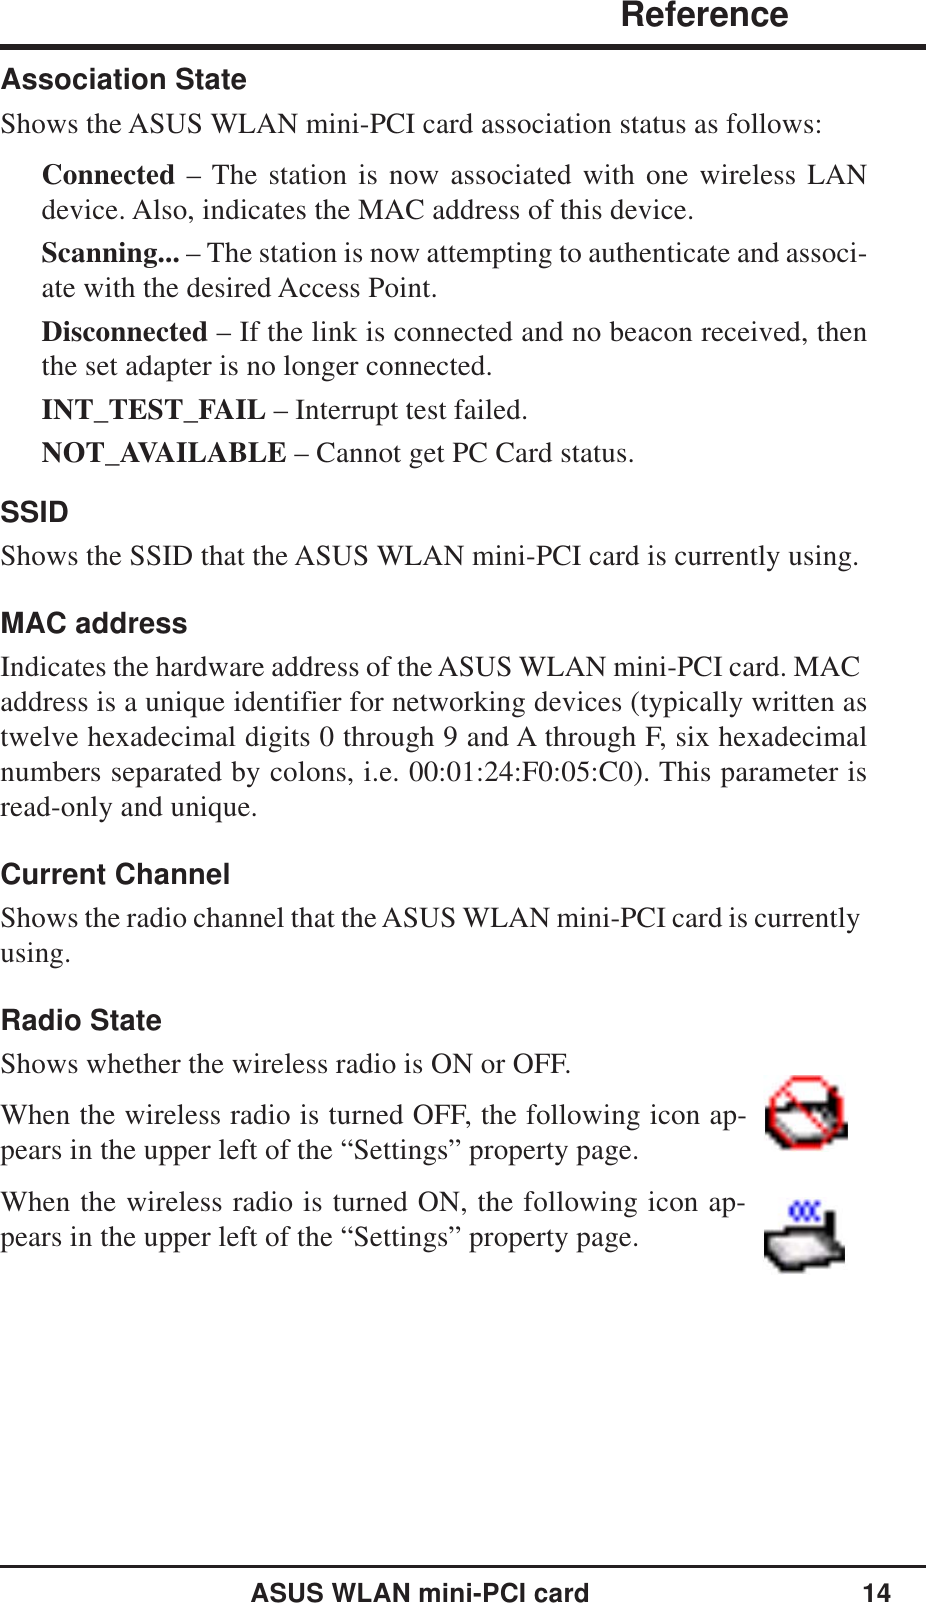 ASUS WLAN mini-PCI card 14                ReferenceChapter 3Association StateShows the ASUS WLAN mini-PCI card association status as follows:Connected – The station is now associated with one wireless LANdevice. Also, indicates the MAC address of this device.Scanning... – The station is now attempting to authenticate and associ-ate with the desired Access Point.Disconnected – If the link is connected and no beacon received, thenthe set adapter is no longer connected.INT_TEST_FAIL – Interrupt test failed.NOT_AVAILABLE – Cannot get PC Card status.SSIDShows the SSID that the ASUS WLAN mini-PCI card is currently using.MAC addressIndicates the hardware address of the ASUS WLAN mini-PCI card. MACaddress is a unique identifier for networking devices (typically written astwelve hexadecimal digits 0 through 9 and A through F, six hexadecimalnumbers separated by colons, i.e. 00:01:24:F0:05:C0). This parameter isread-only and unique.Current ChannelShows the radio channel that the ASUS WLAN mini-PCI card is currentlyusing.Radio StateShows whether the wireless radio is ON or OFF.When the wireless radio is turned OFF, the following icon ap-pears in the upper left of the “Settings” property page.When the wireless radio is turned ON, the following icon ap-pears in the upper left of the “Settings” property page.